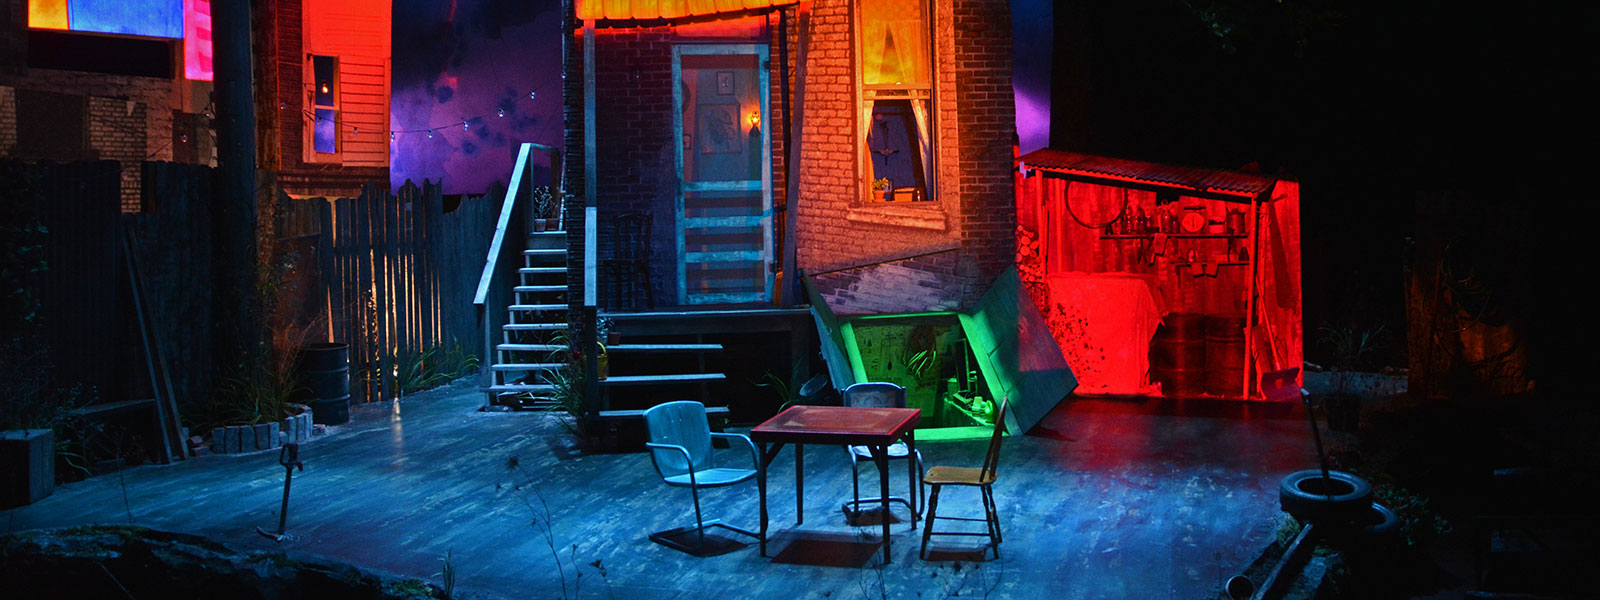 "Seven Guitars" at Actors Theatre of Louisville, 2015, with lighting design by Perkins